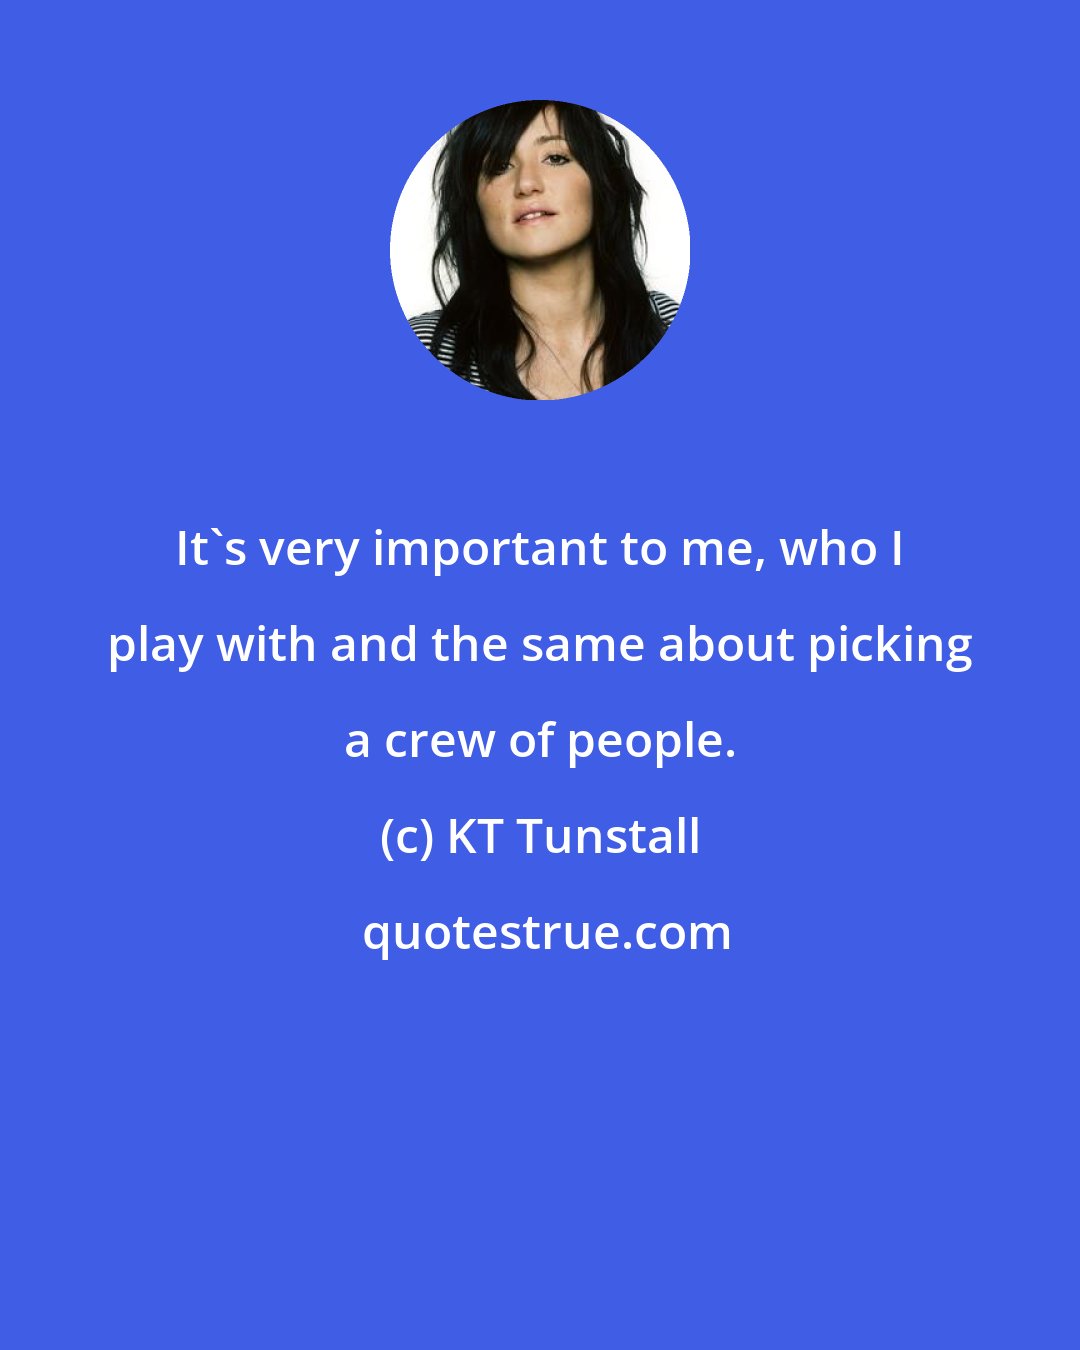 KT Tunstall: It's very important to me, who I play with and the same about picking a crew of people.